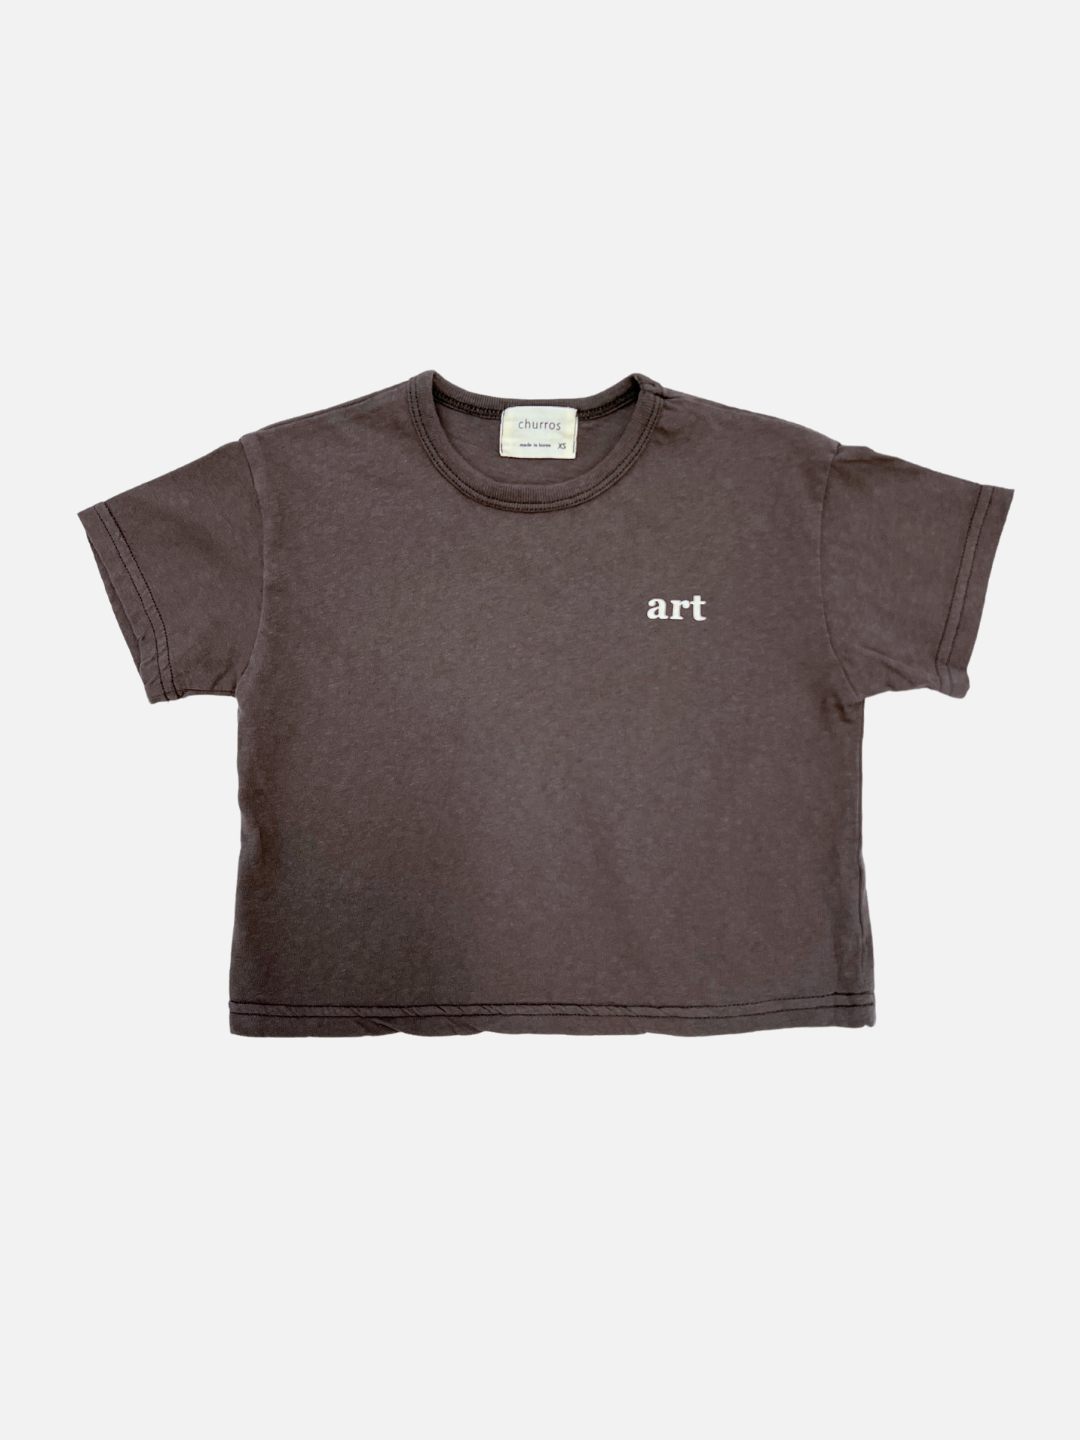 Charcoal | Front view of the kid's Studio tee in charcoal, with the words "art" printed on the right side